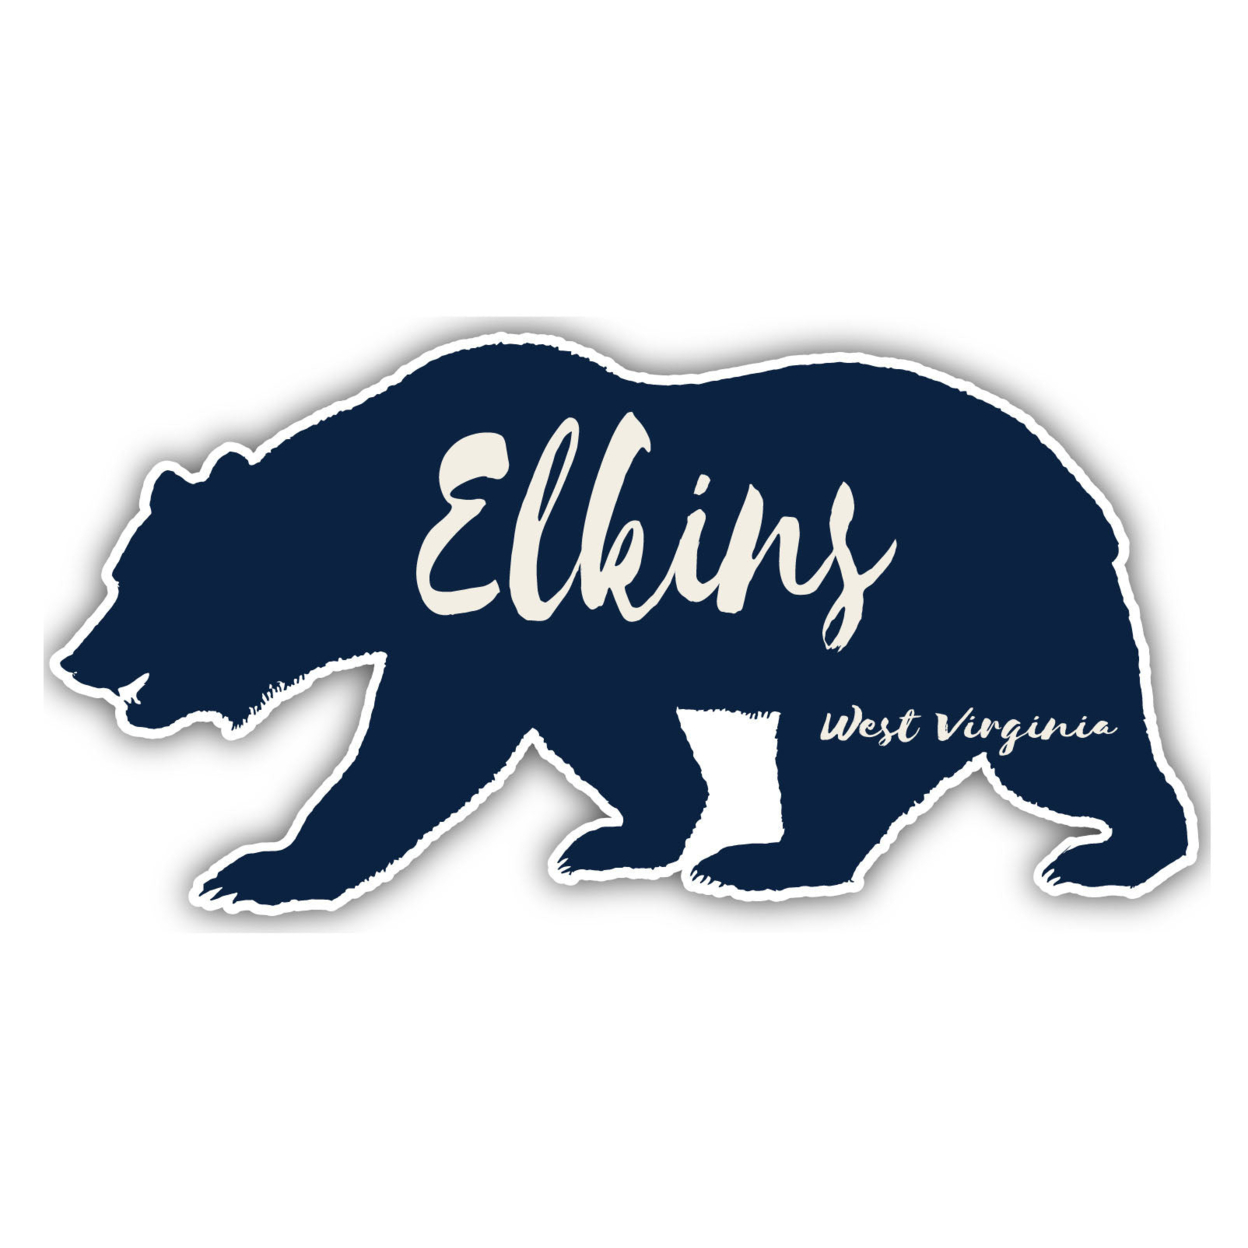 Elkins West Virginia Souvenir Decorative Stickers (Choose Theme And Size) - 4-Pack, 8-Inch, Camp Life